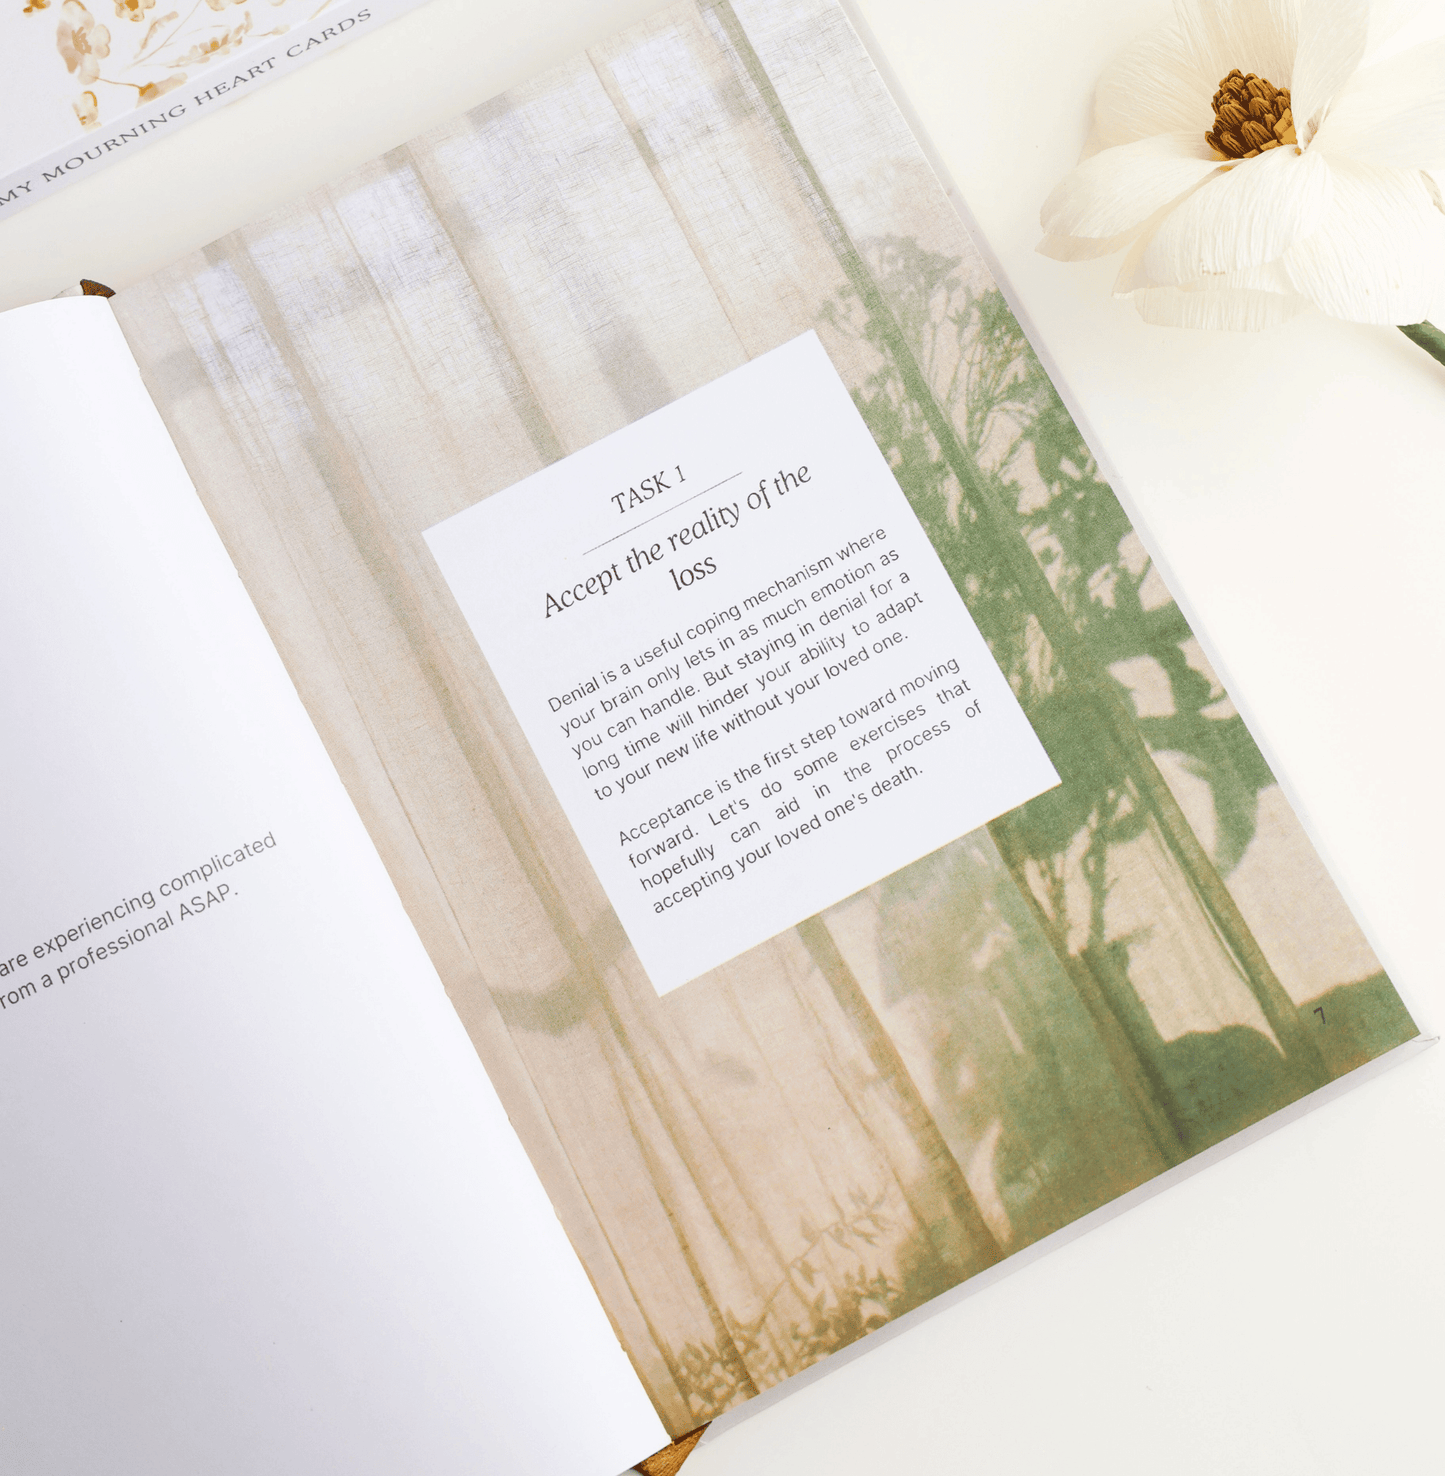 DALAMHATI: A Guided Grief Journal